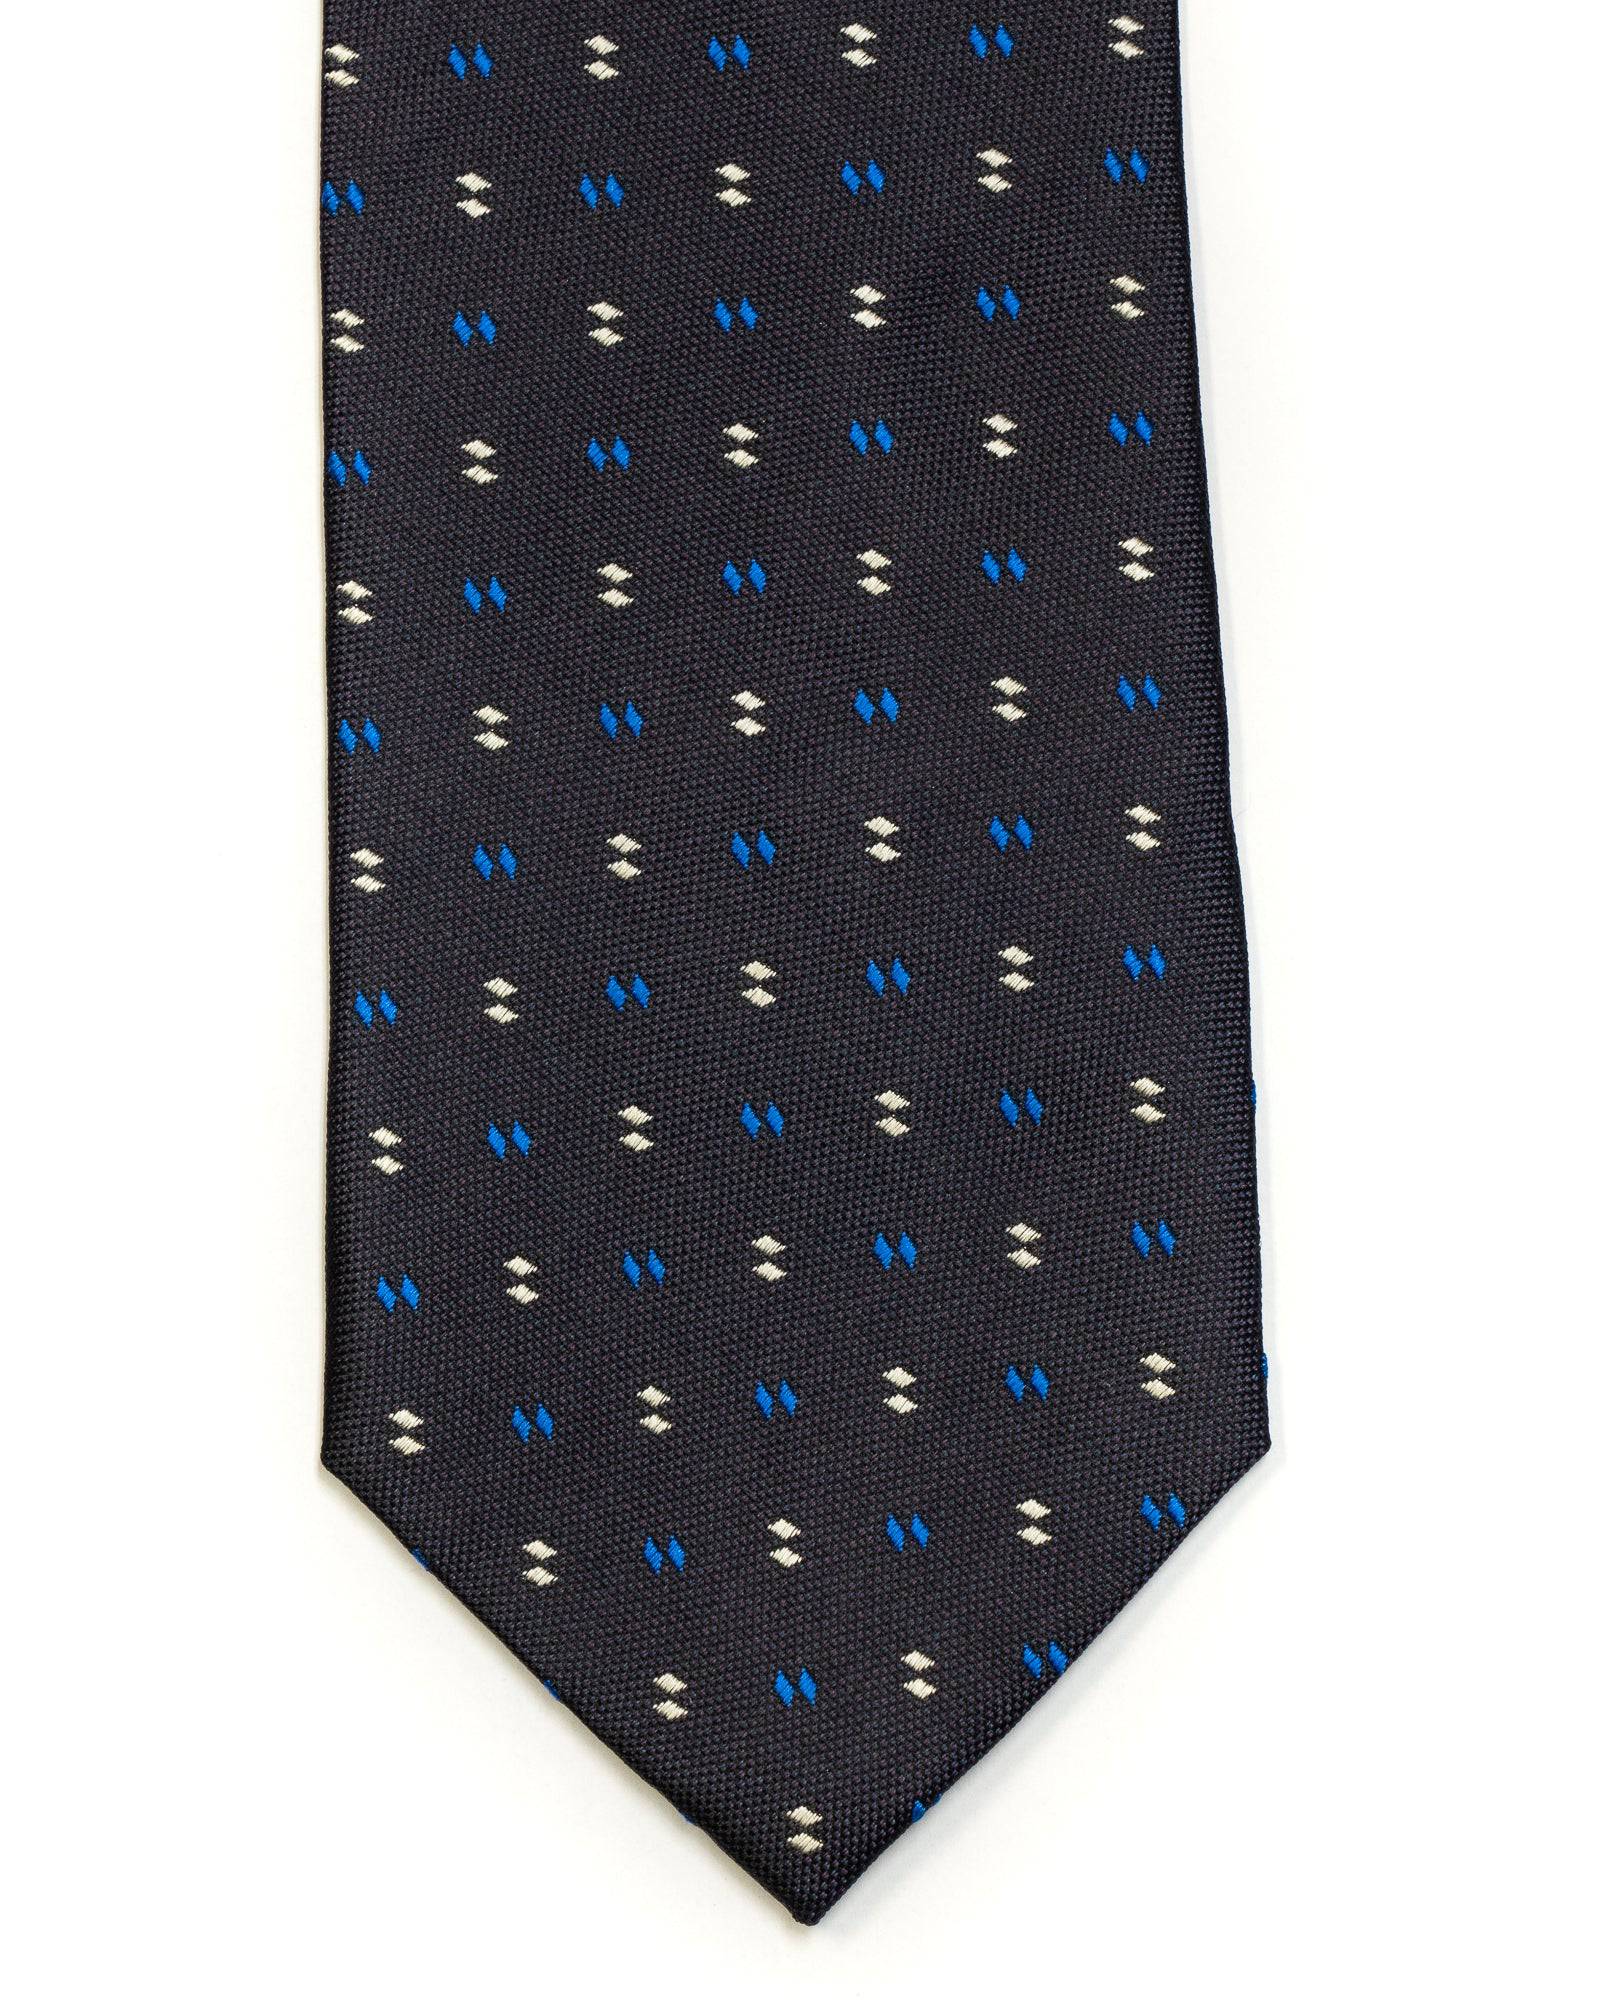 Silk Tie in Navy And Blue Neat Foulard Print - Rainwater's Men's Clothing and Tuxedo Rental